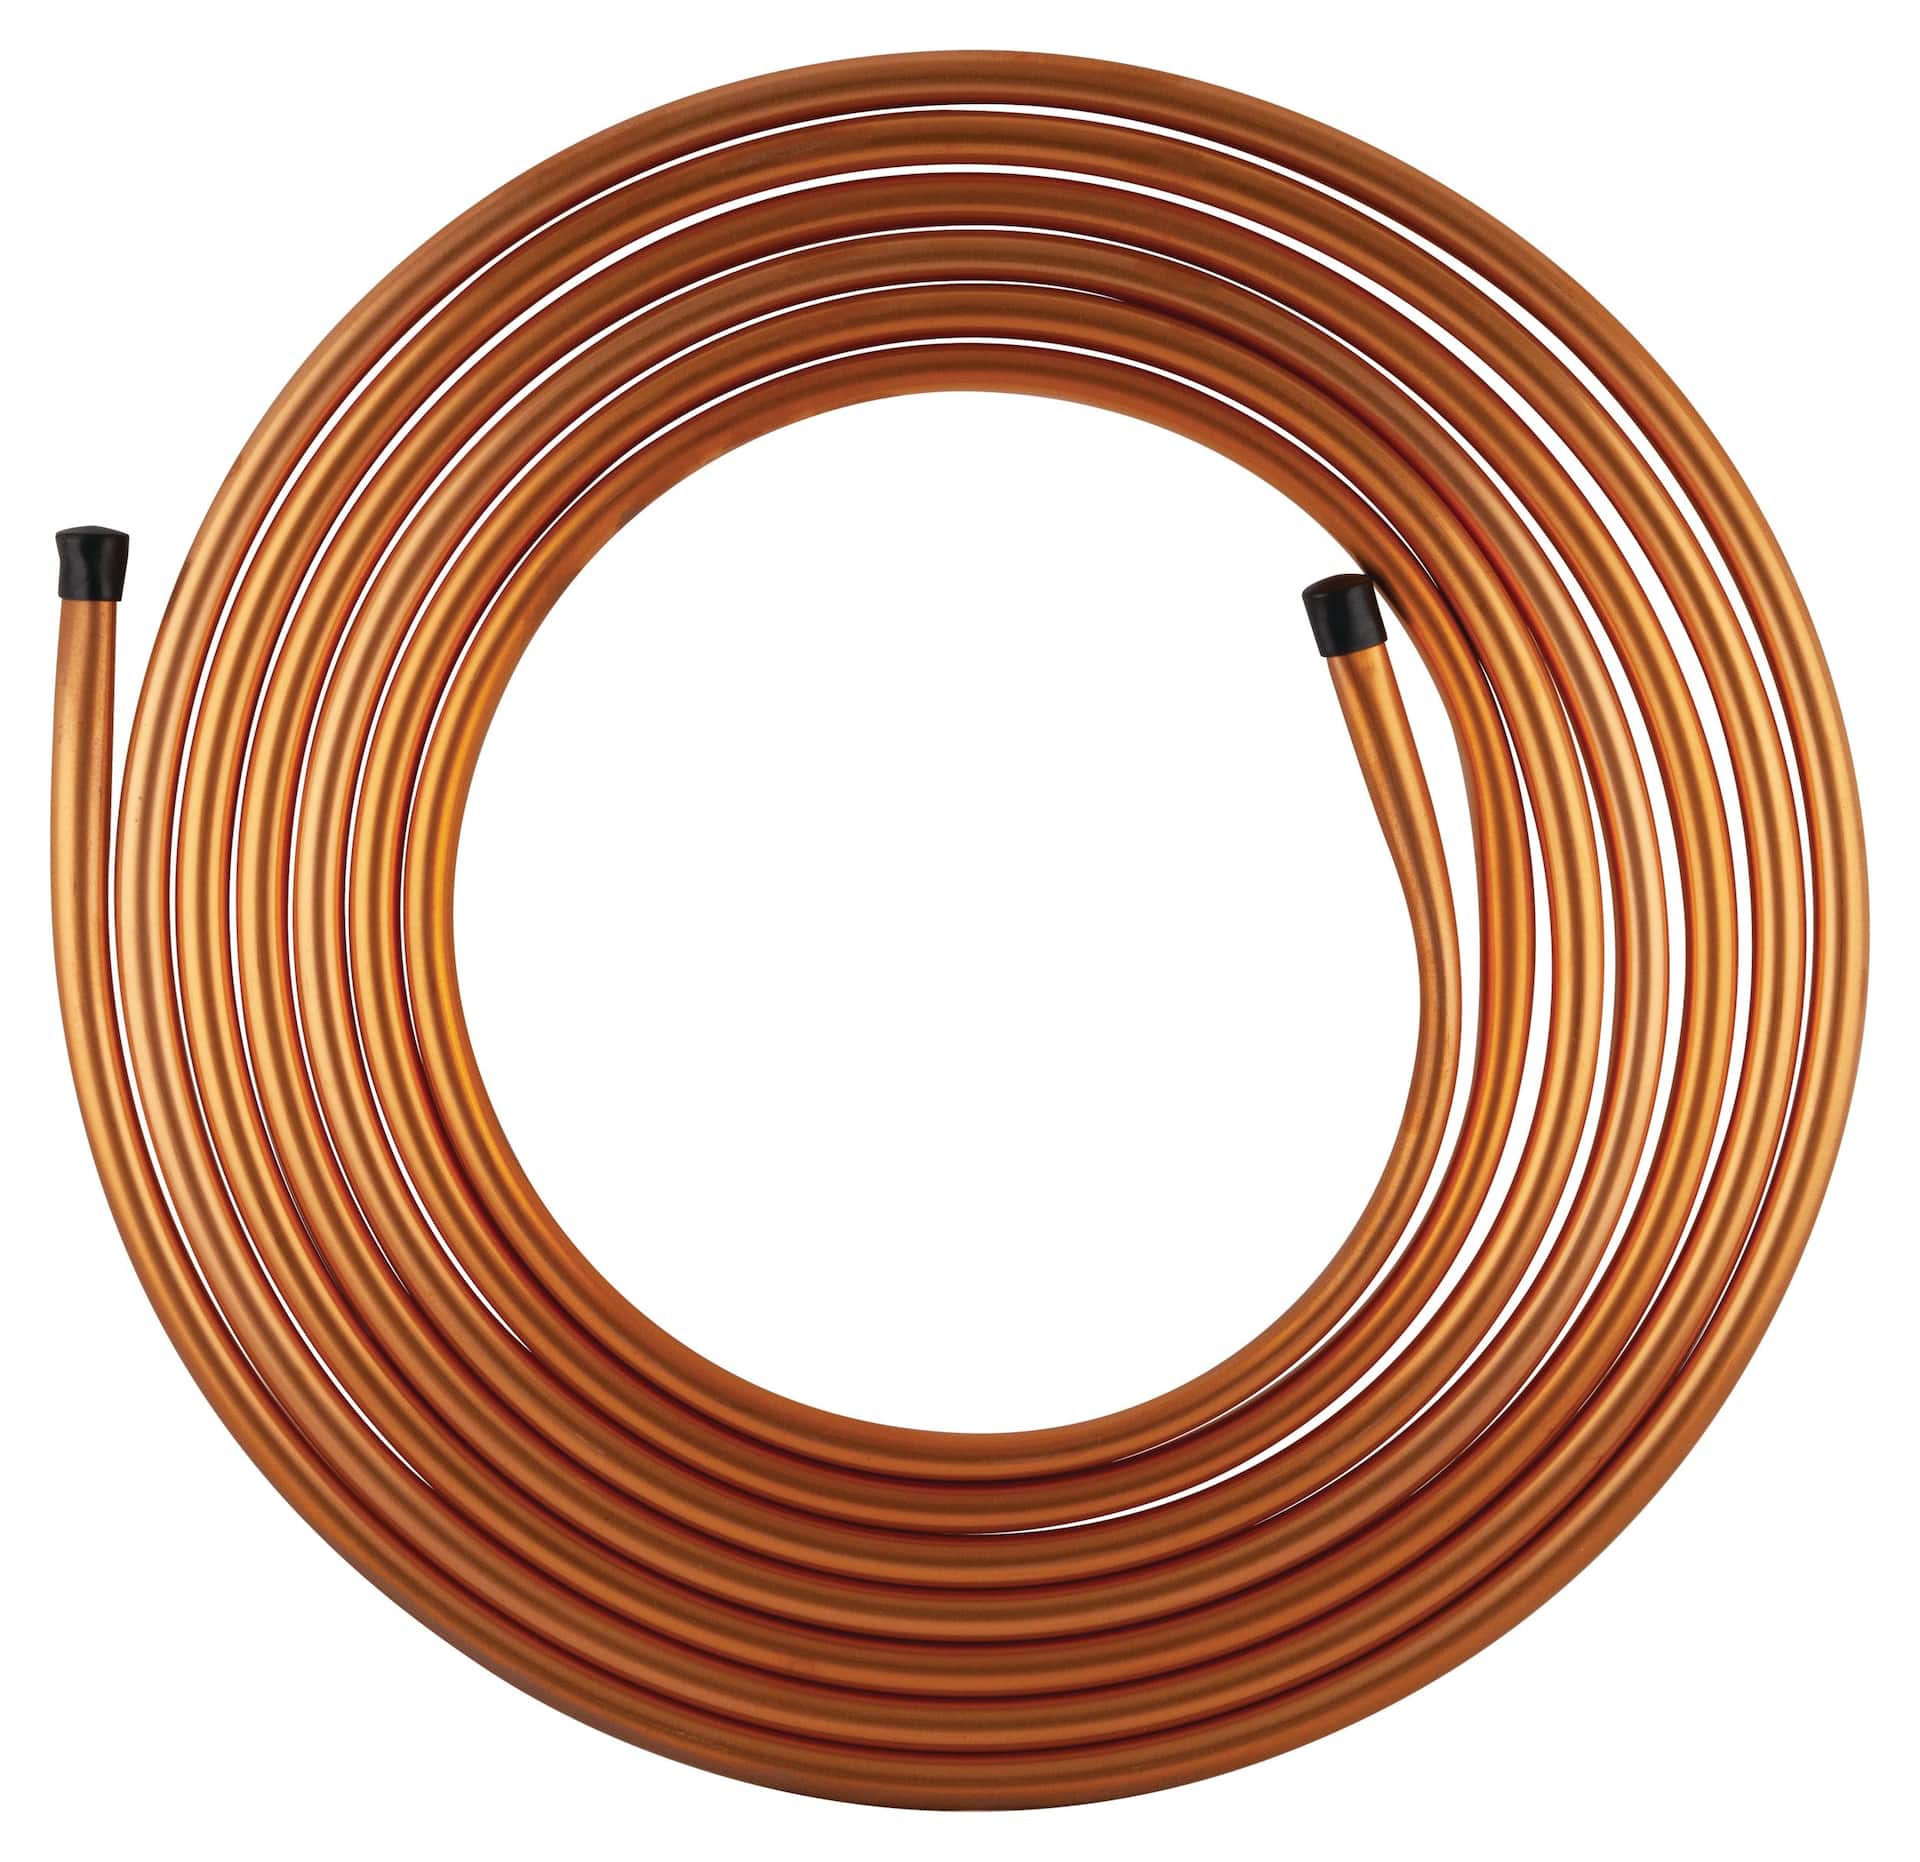 Everbilt 3/8 in. x 20 ft. Soft Copper Refrigeration Coil Tubing D